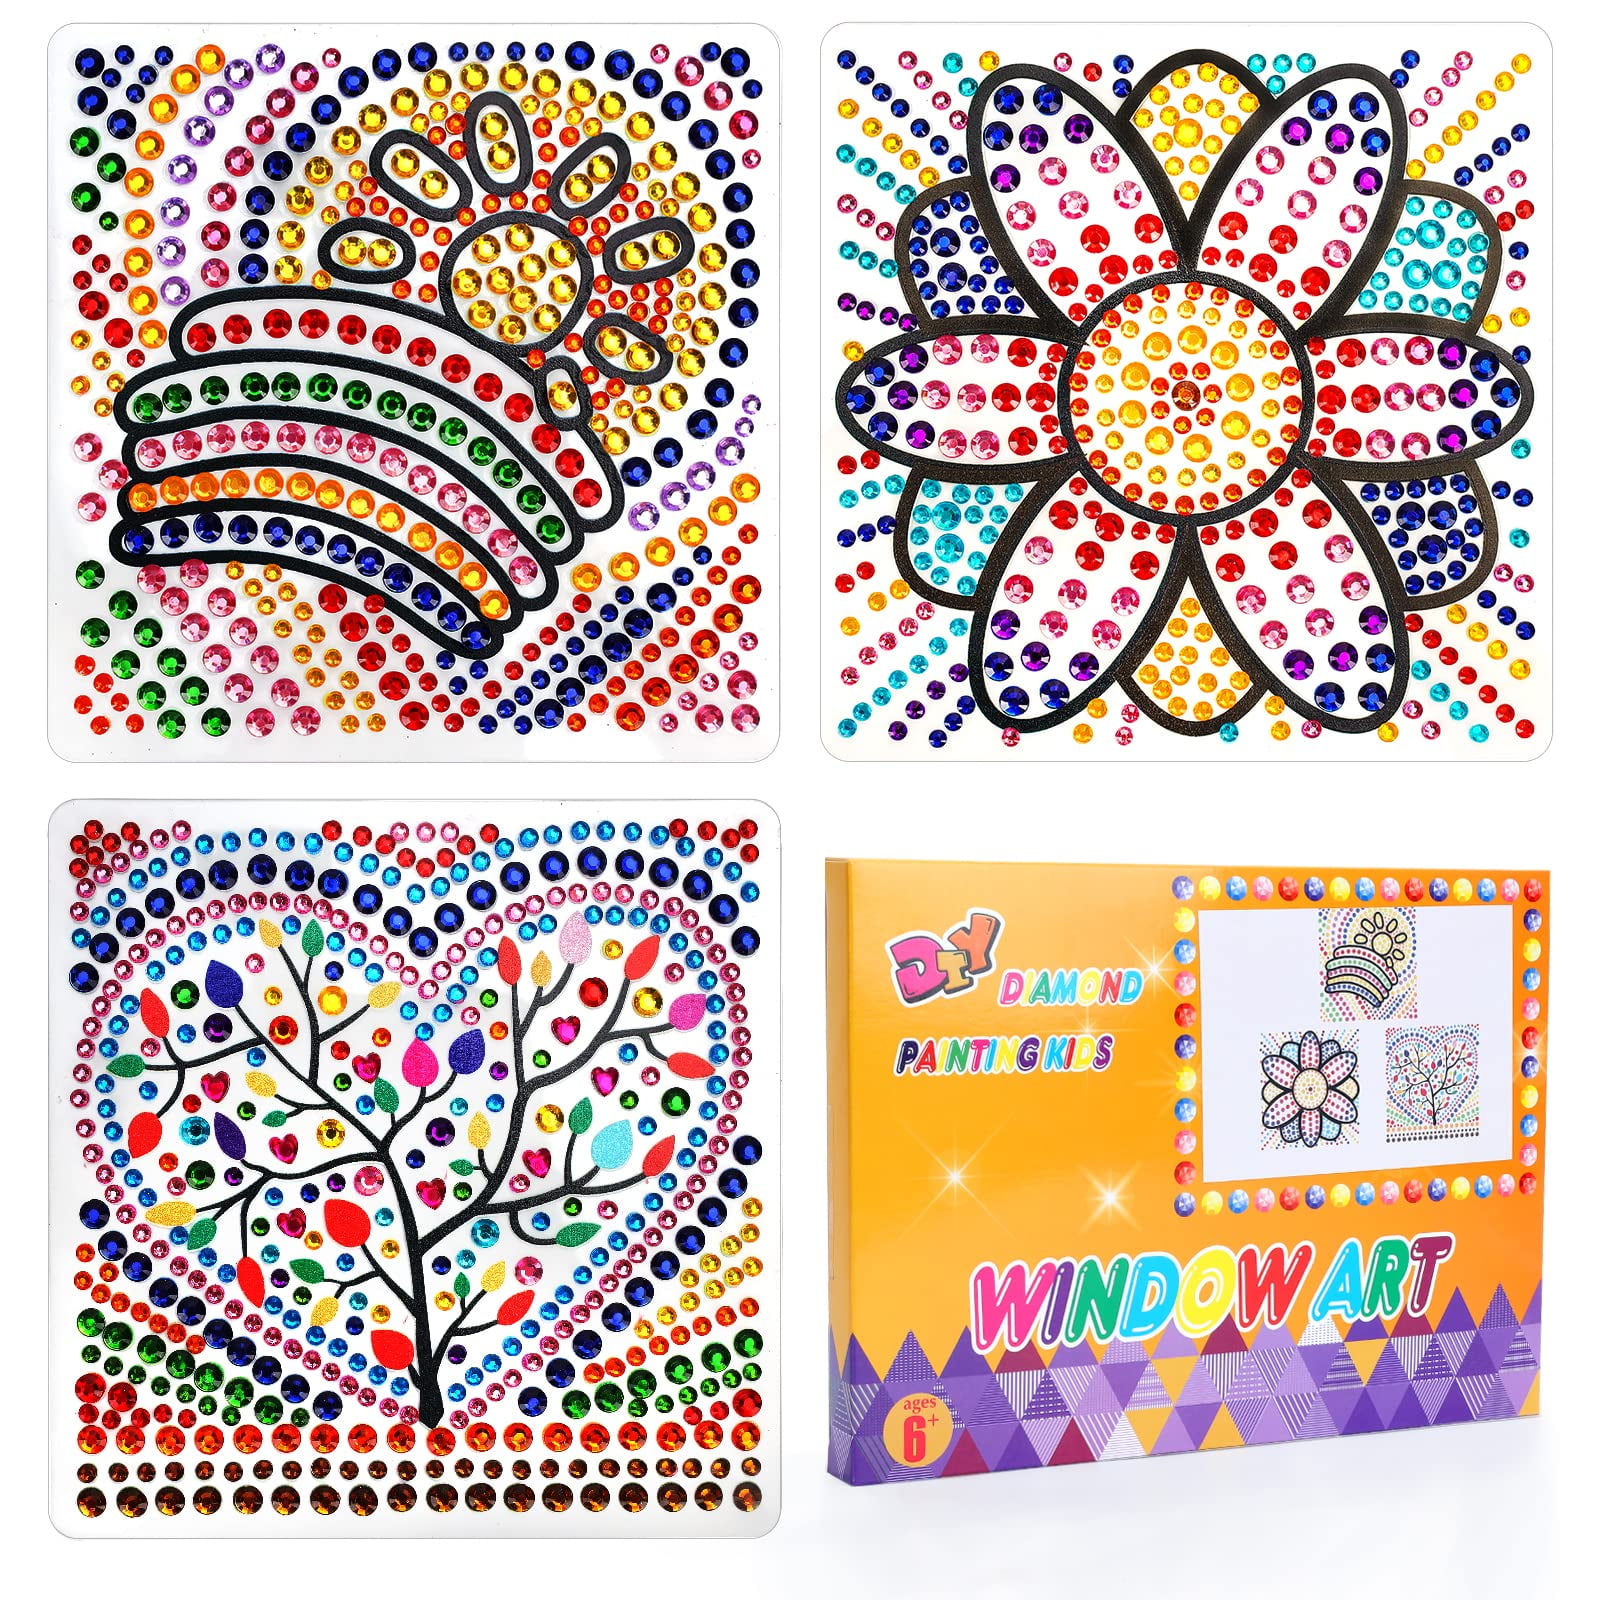 Arts and Crafts for Kids Ages 8-12 & 6-8 RTHPY Window Suncatcher Diamond Painting  Kits by Numbers for Girl Ages 7 9 11 Year Old Gem Art for Kids Ages 9-12  Birthday Gift Idea for Teens (Nature)